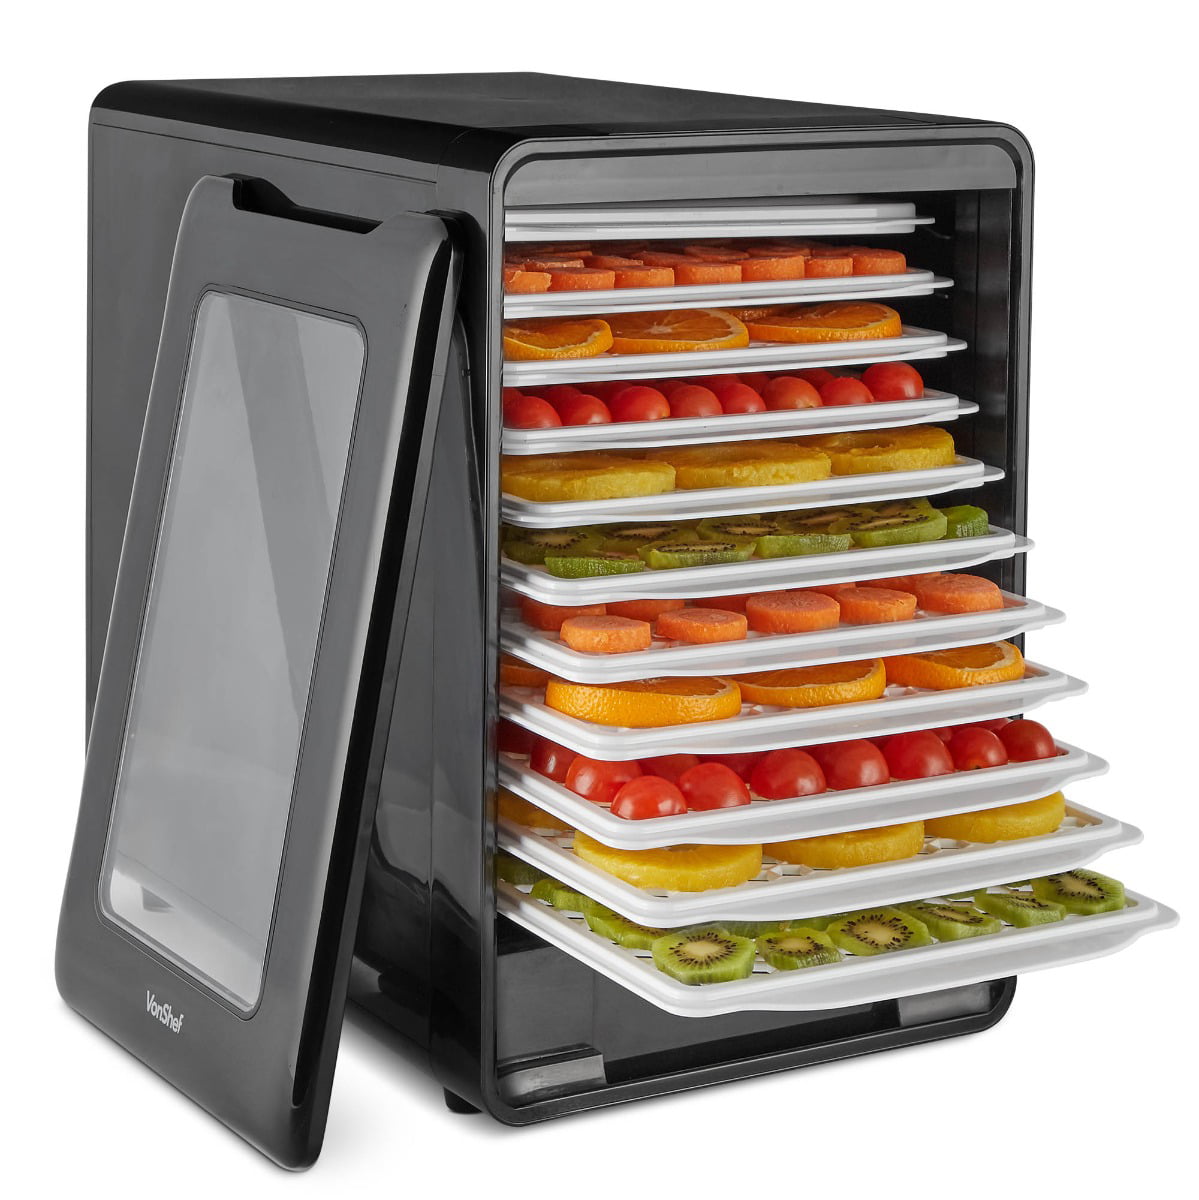 VonShef 10 Tier Food Dehydrator Machine with Large LCD Display